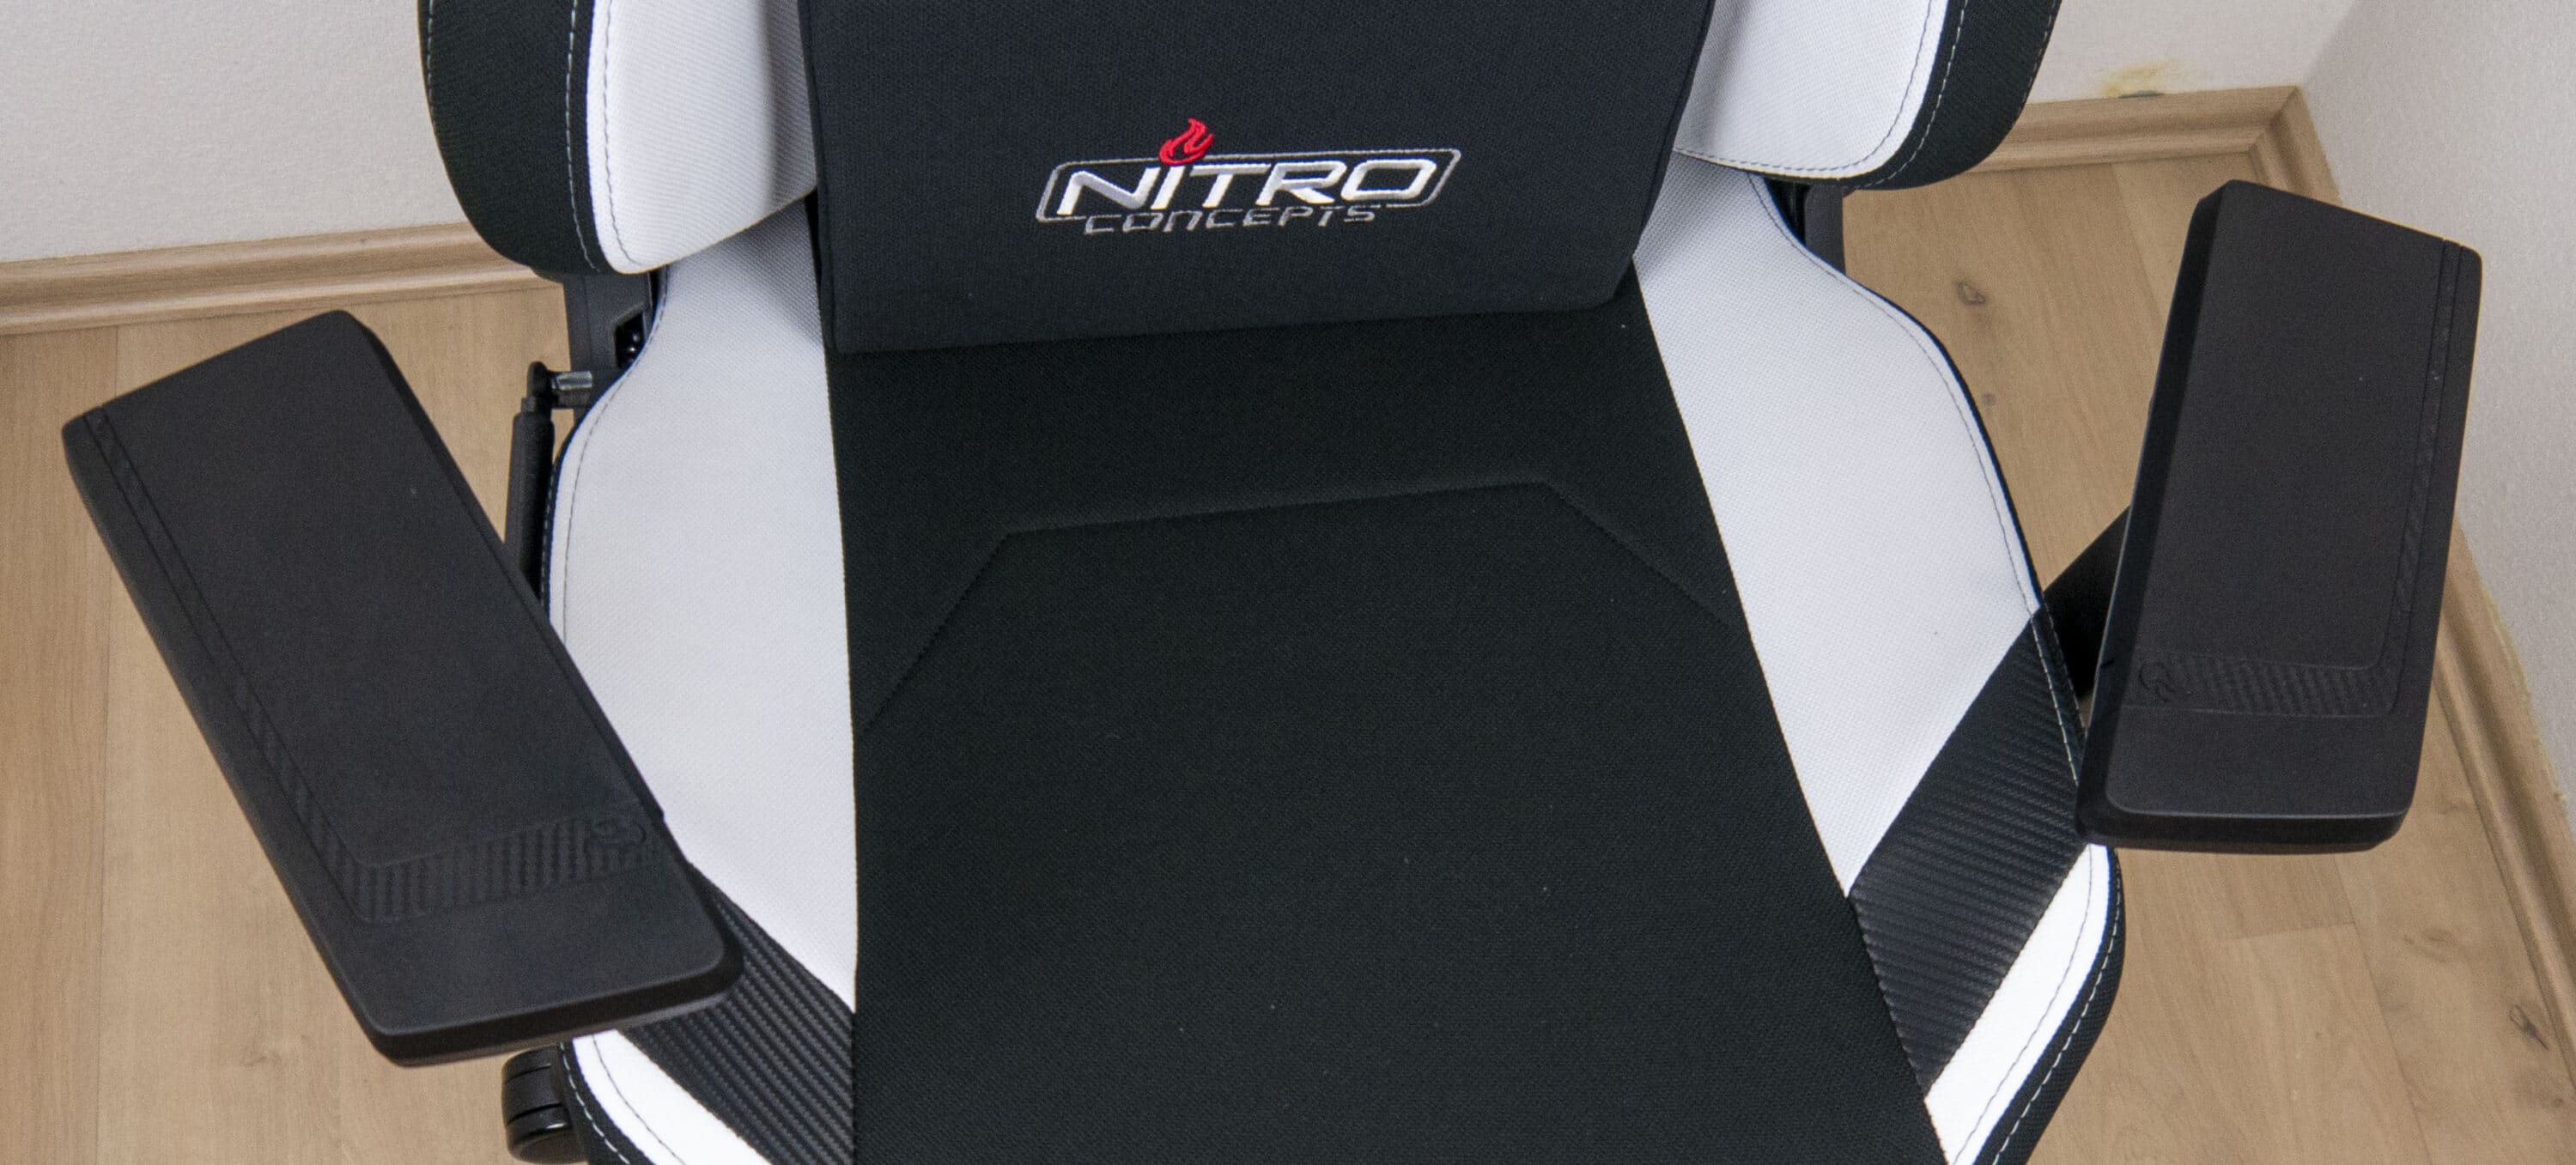 Nitro Concepts X1000 A Gaming Chair For Broad People